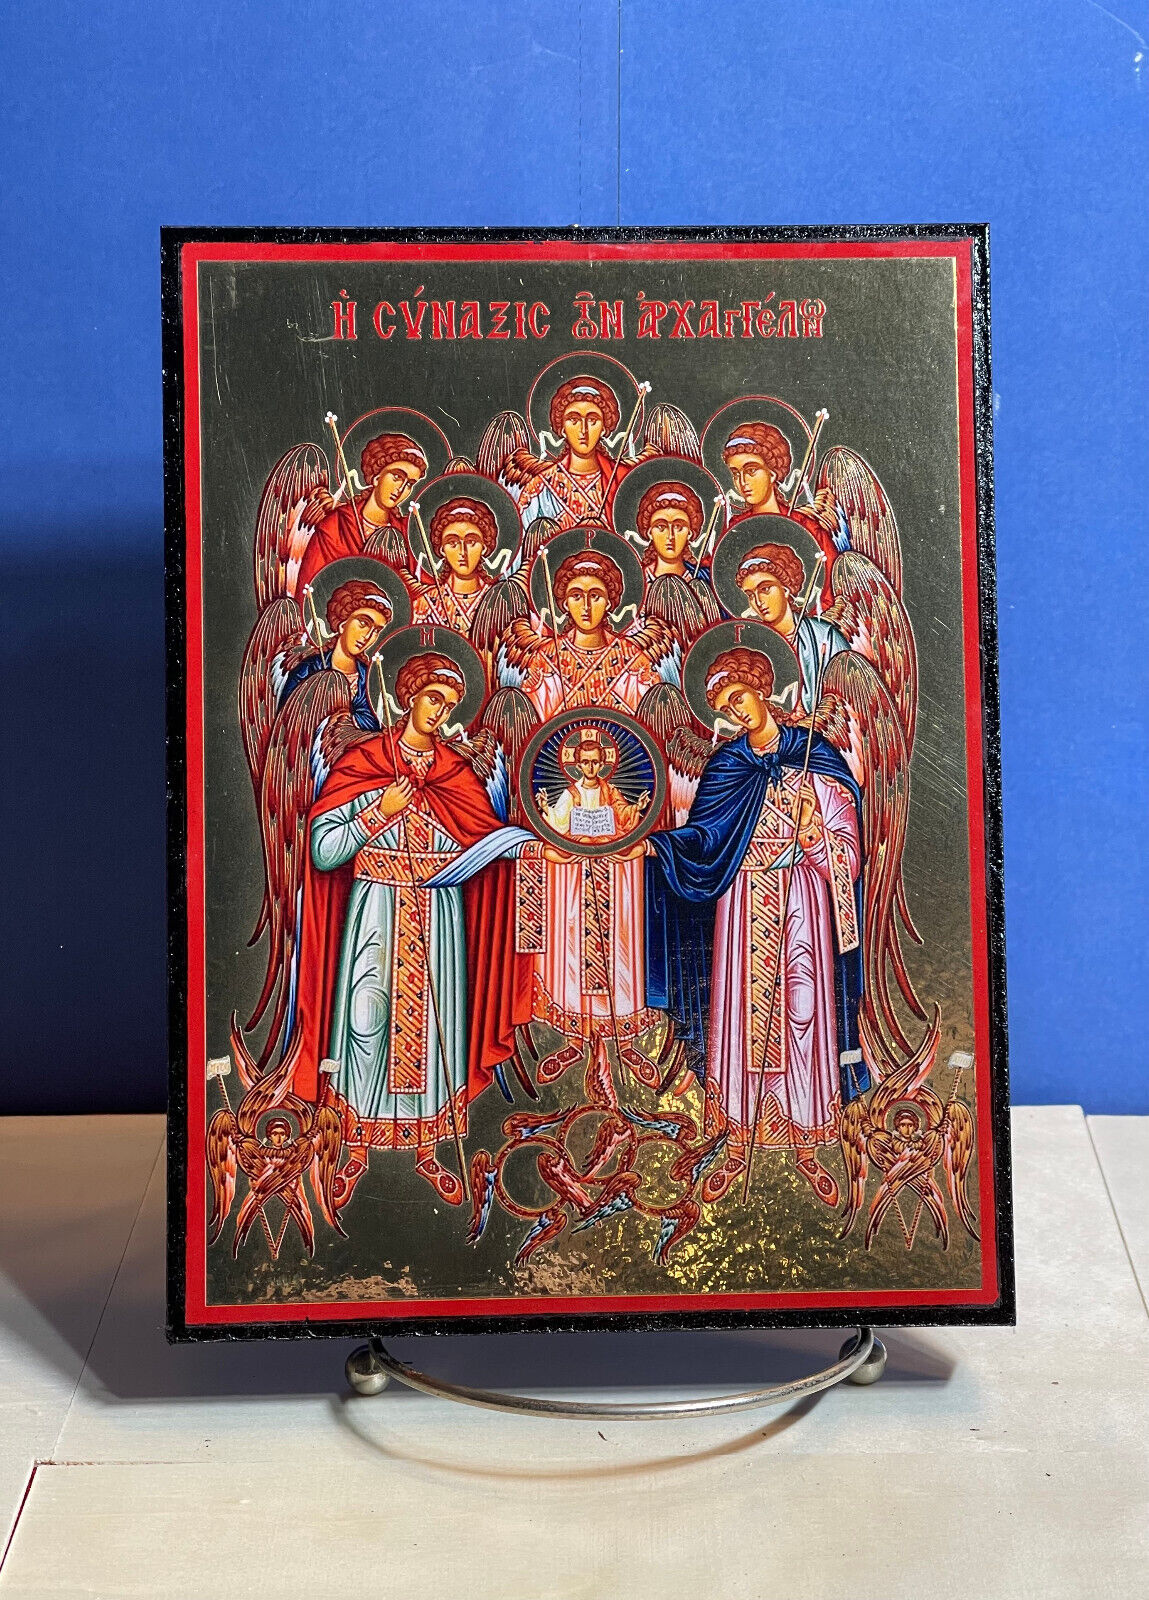 SYNAXIS OF THE HOLY ARCHANGELS - Orthodox high quality byzantine style Icon 6x8